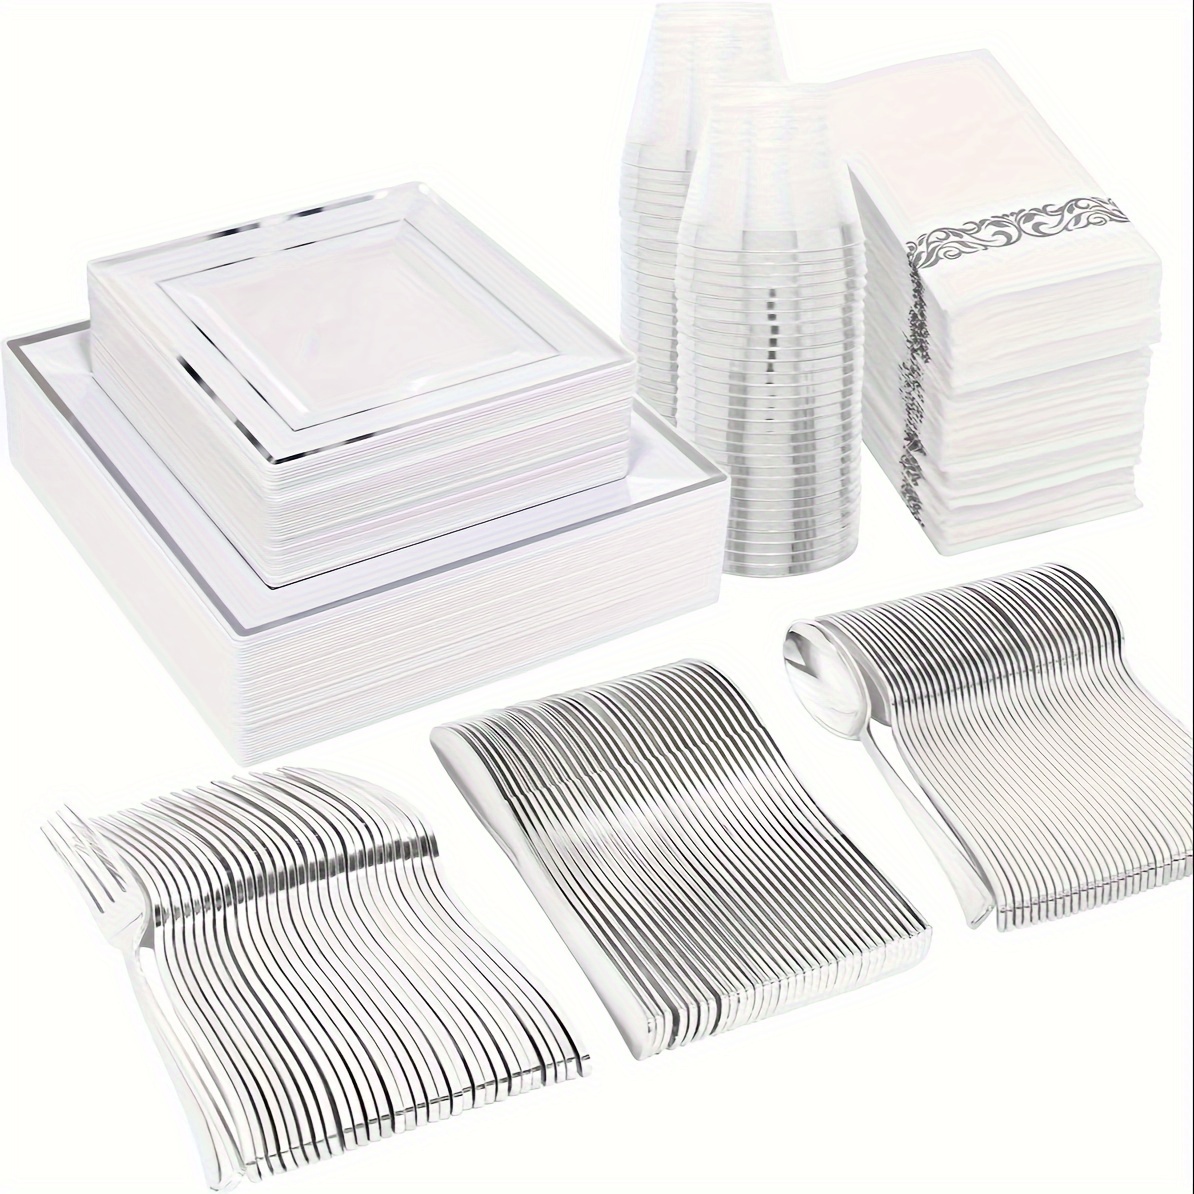 

50 Guest Silver Plastic Plates With Disposable Cutlery& Silver Plastic Cups-square Plates-silver Plastic Utensils Set And Napkins For Wedding& Parties